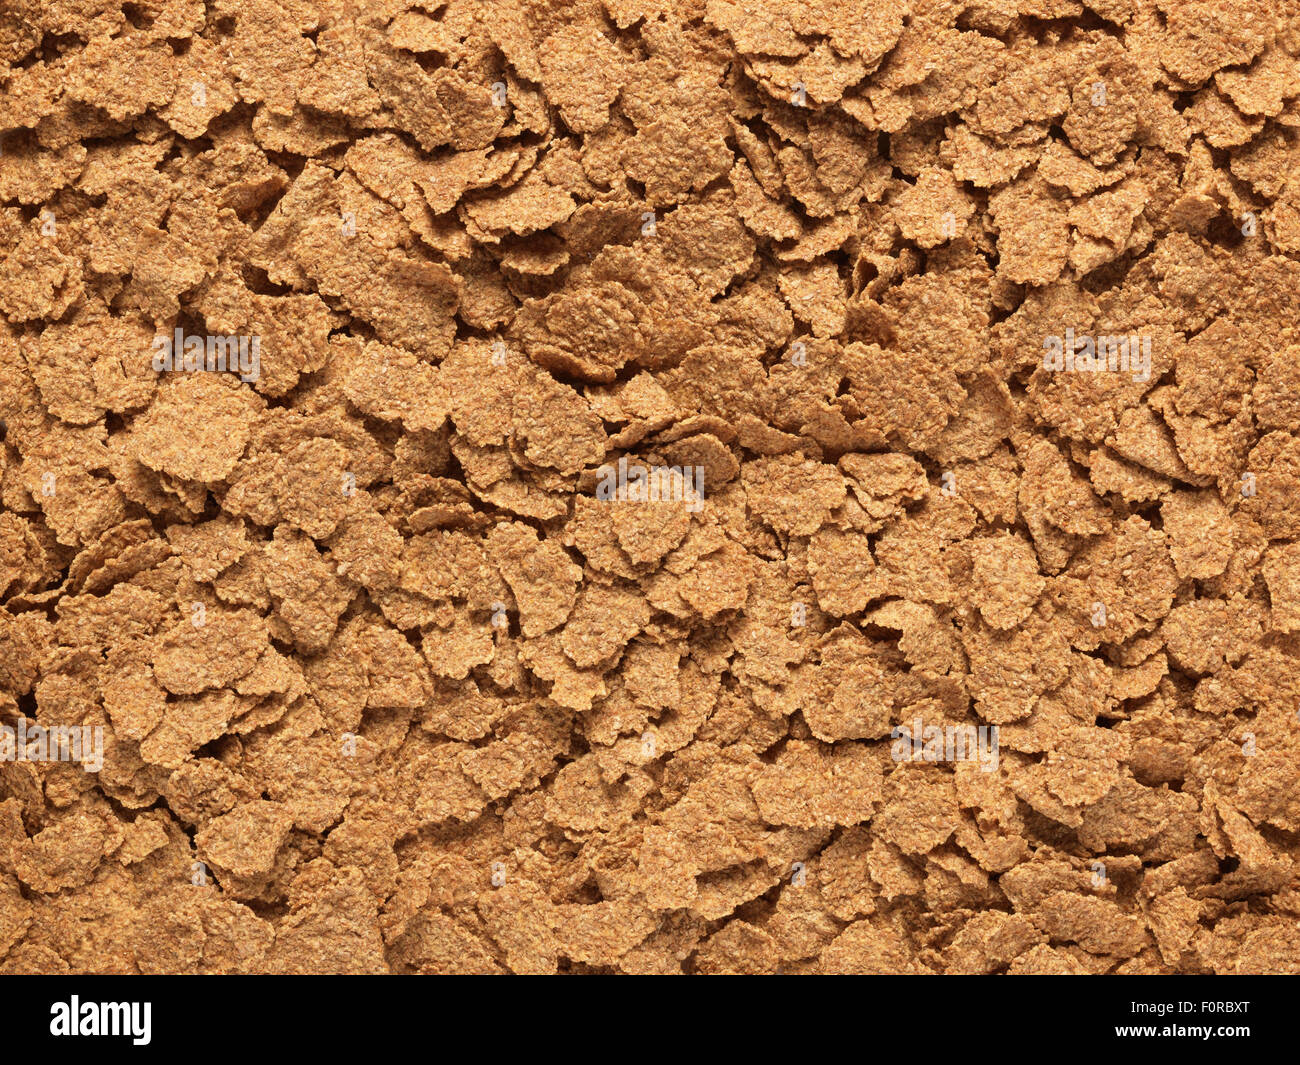 close up, full frame shot of bran flaked breakfast cereal ideal for use as a healthy living, organic background image. Stock Photo